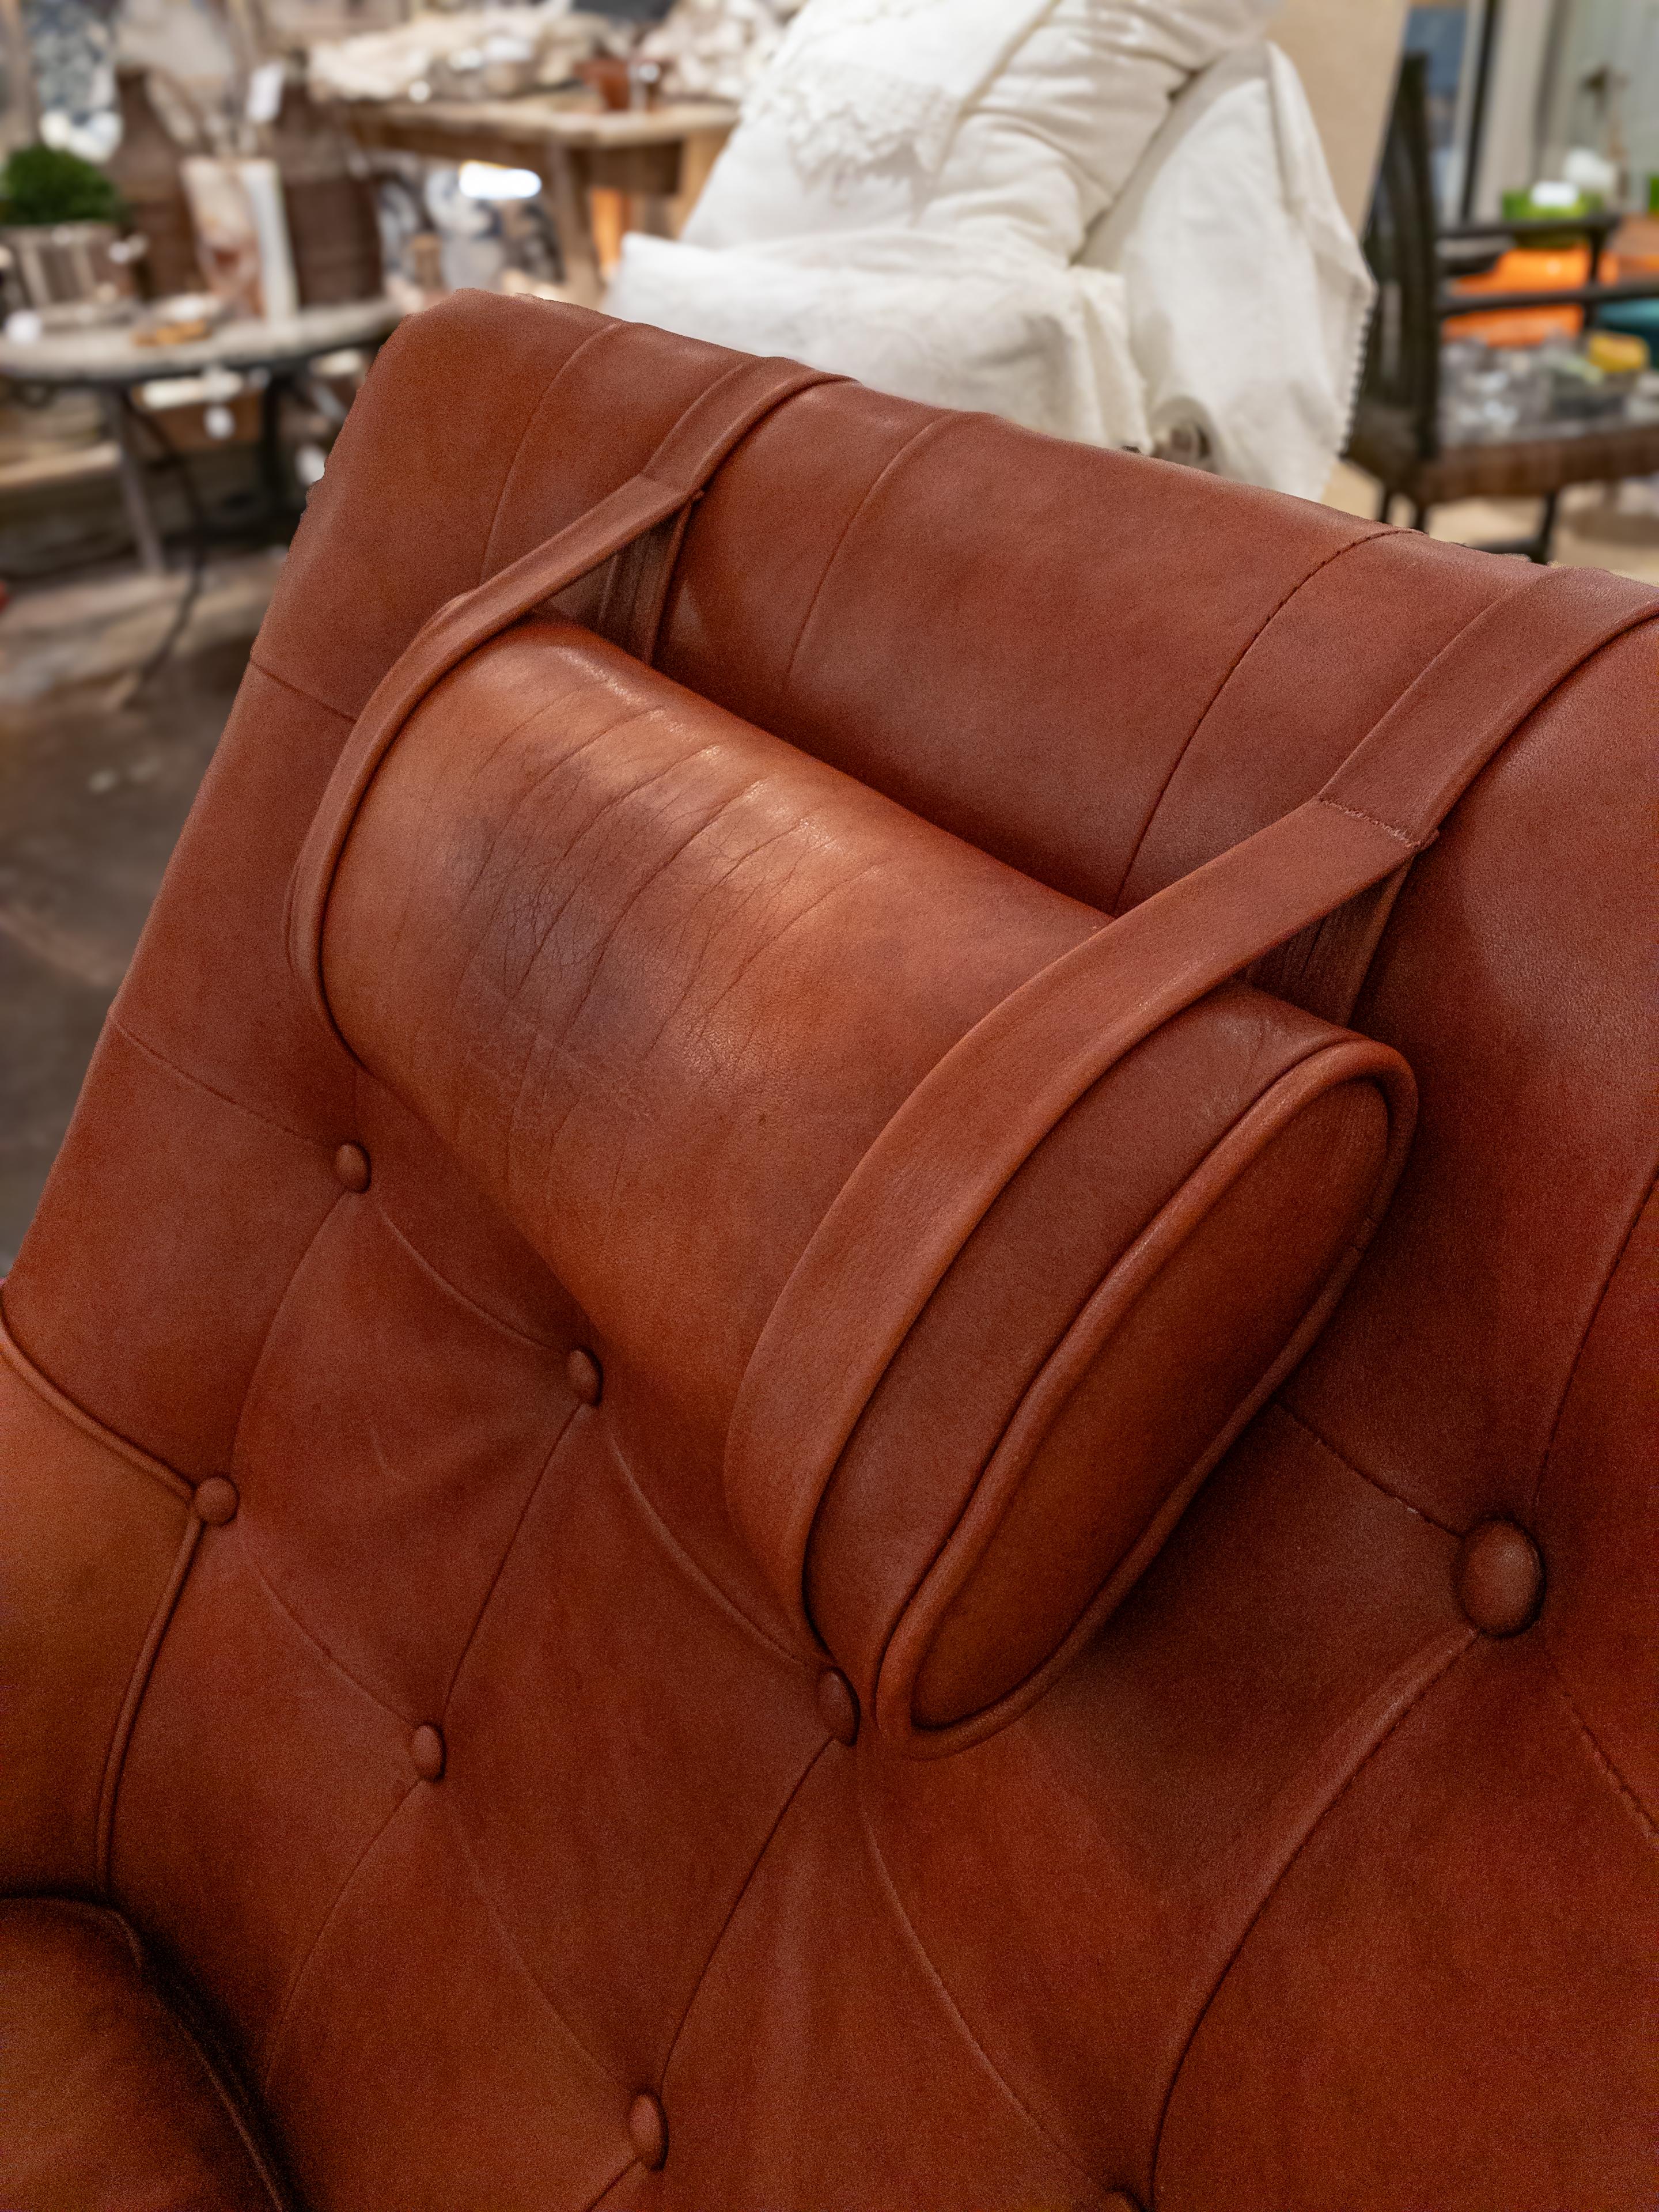 Mid-20th Century Tove & Edvard Kindt-Larsen Leather Lounge Chair For Sale